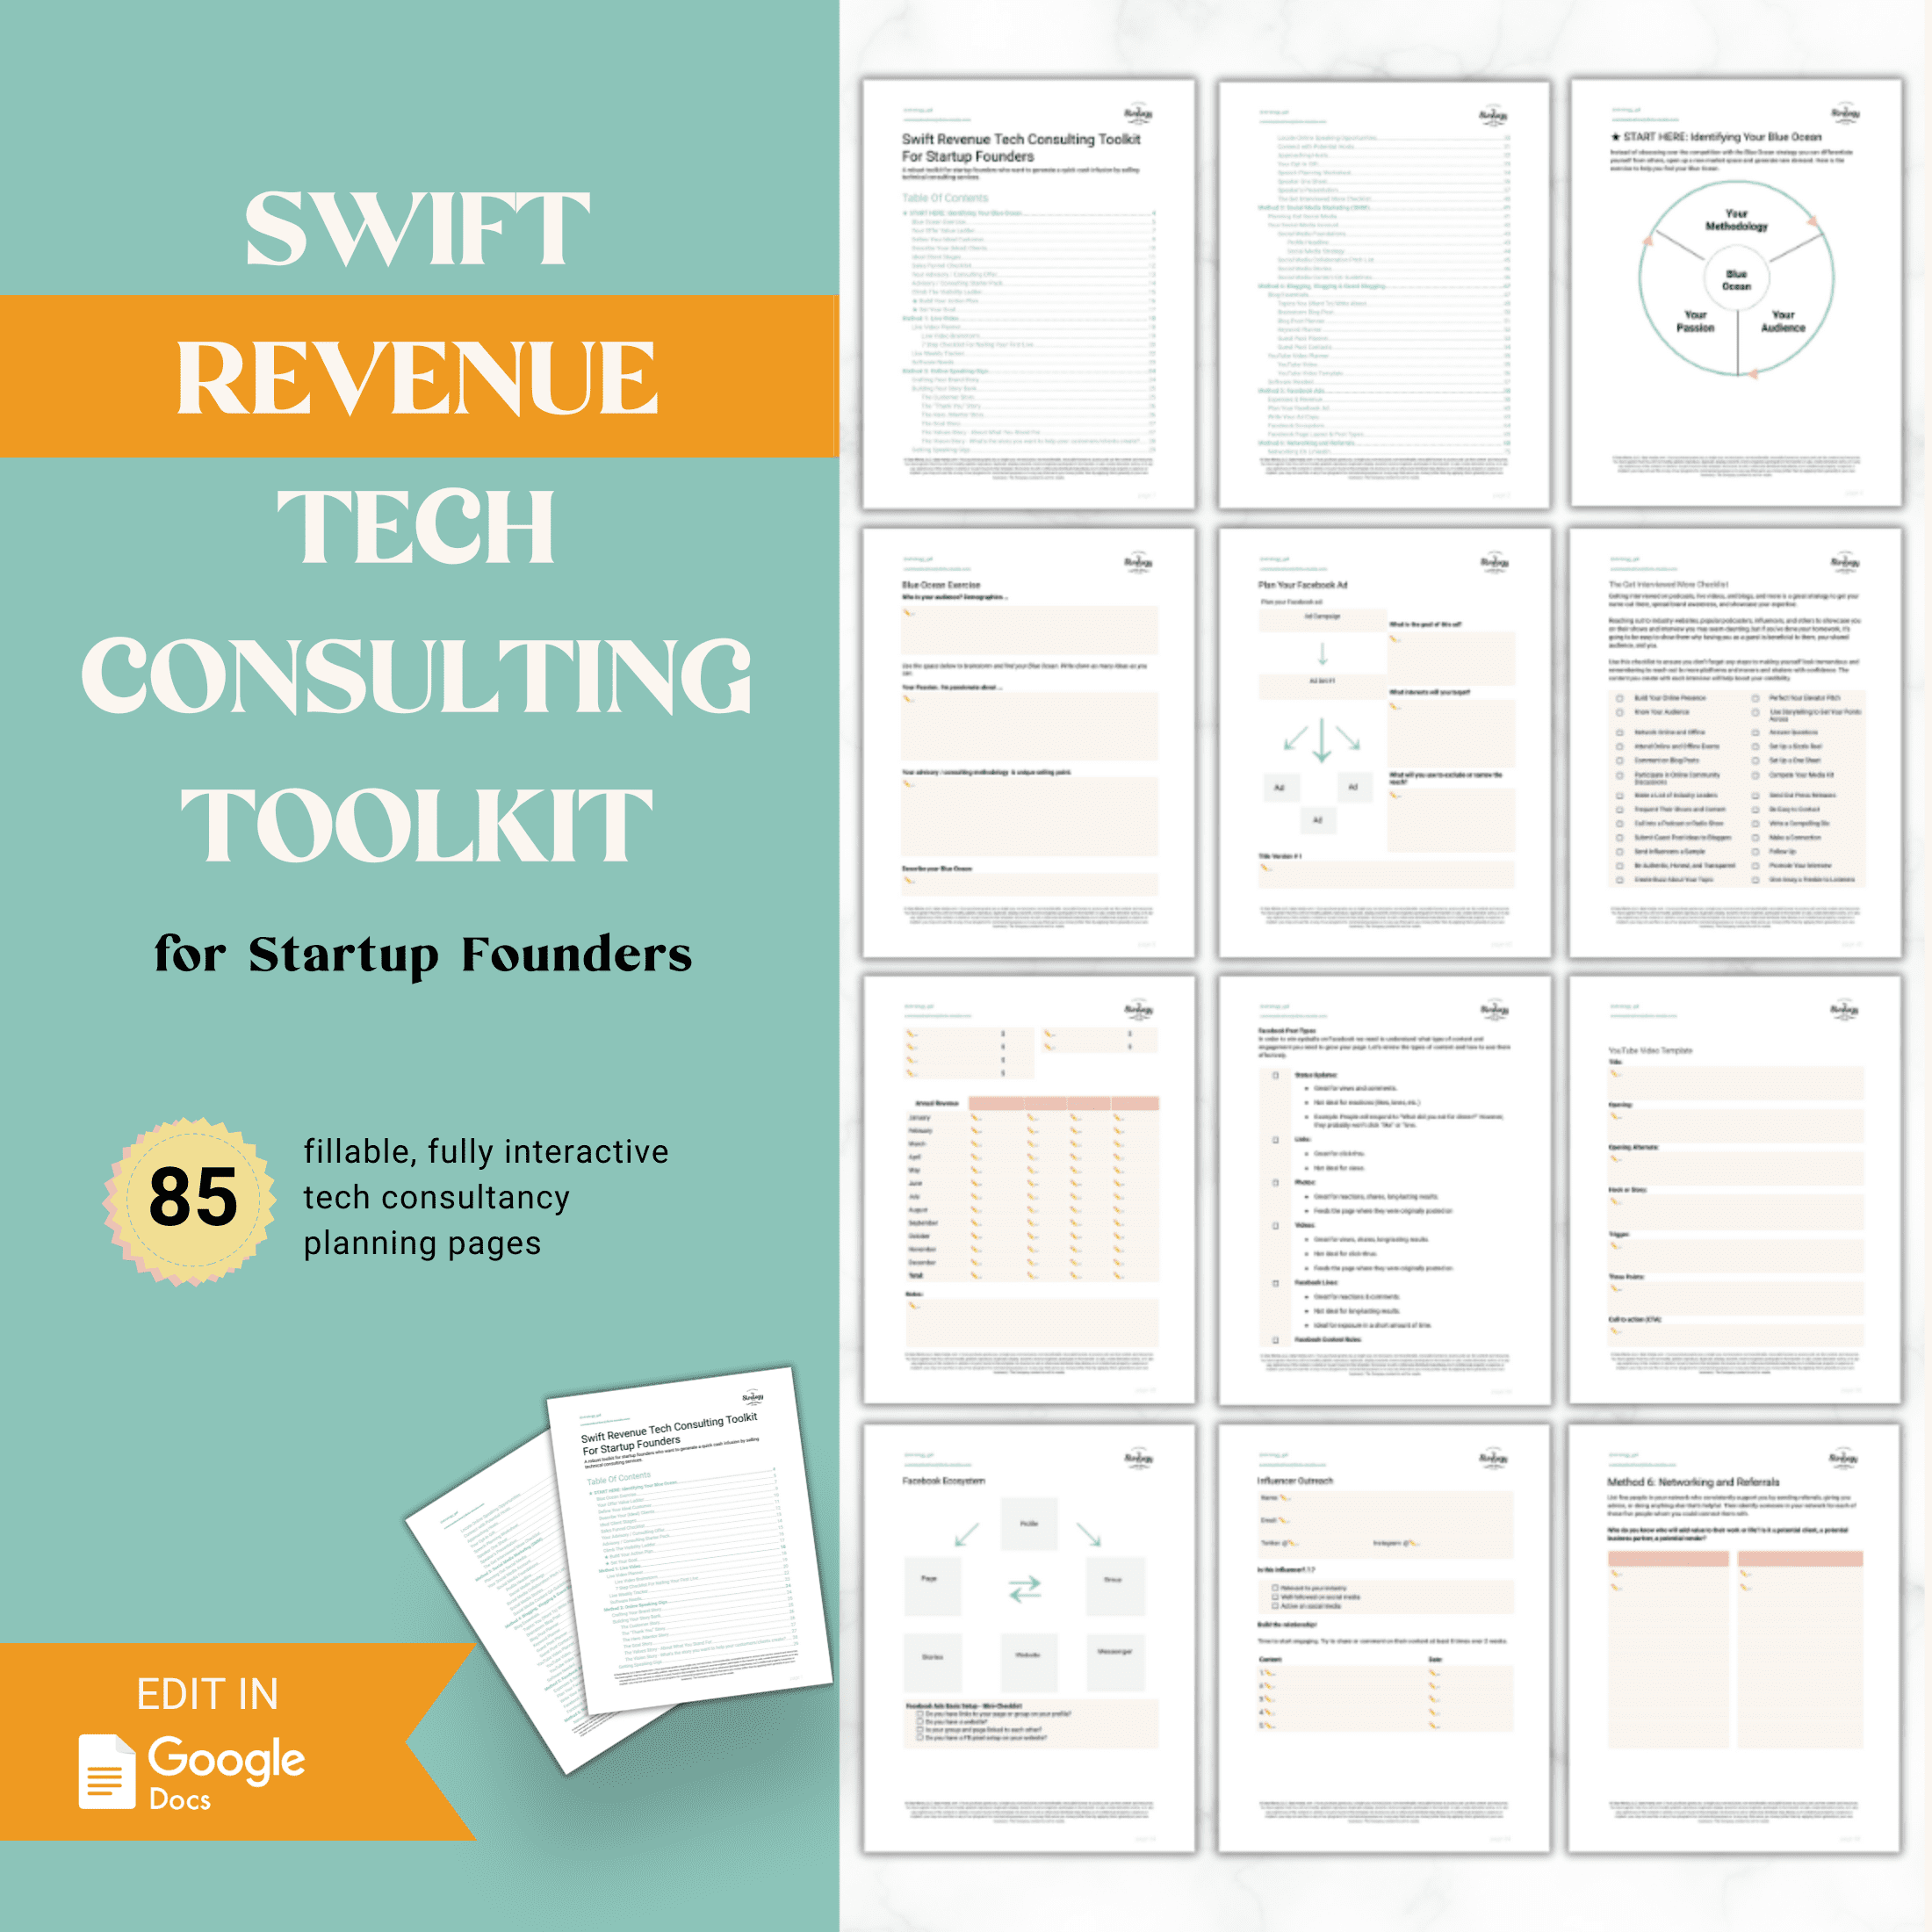 Swift Revenue Tech Consulting Toolkit For Startup Founders